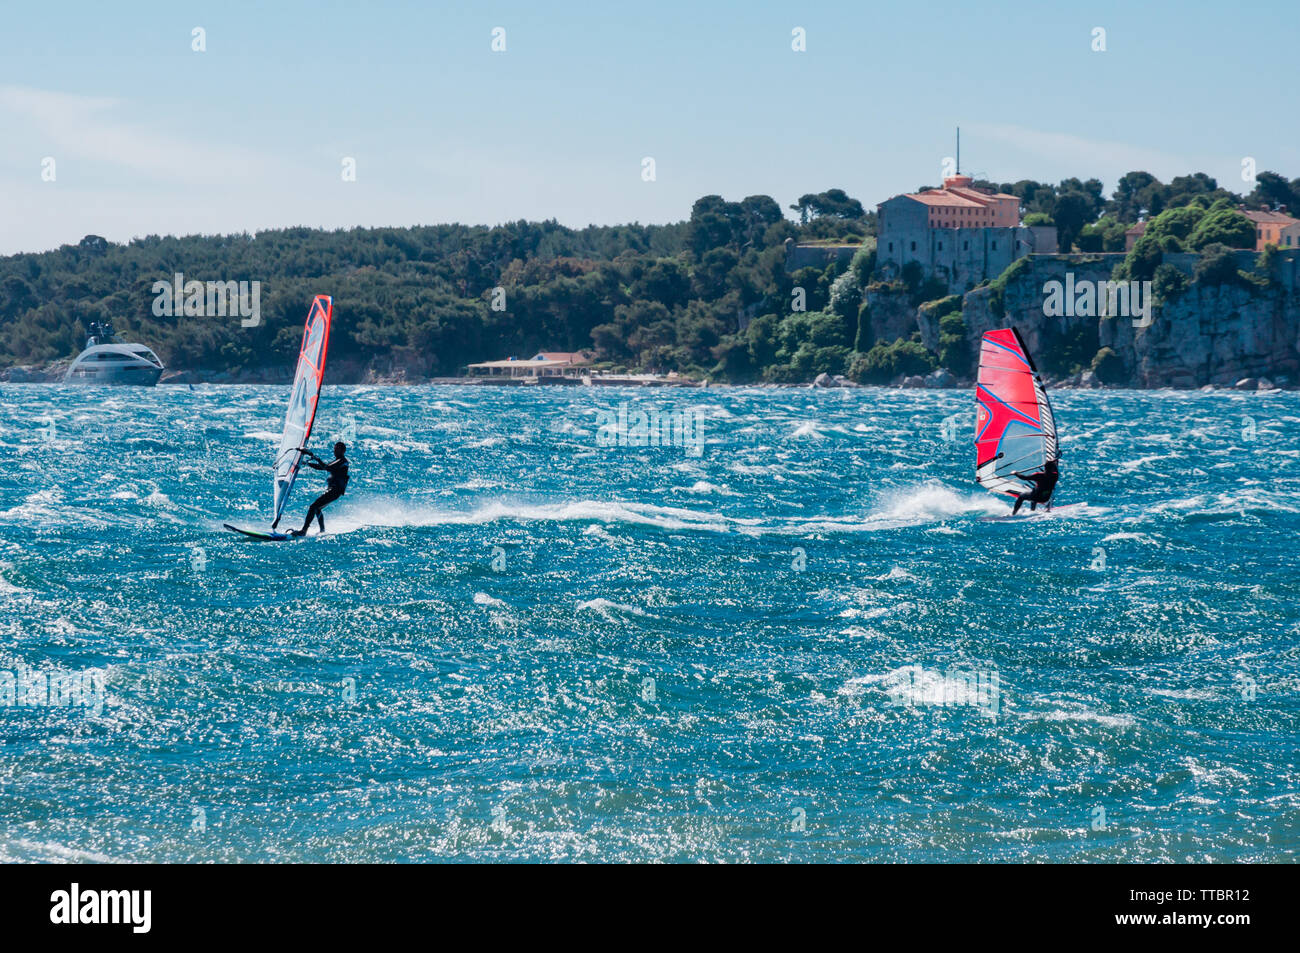 Windsurfing in the Bay of Cannes, France Stock Photo